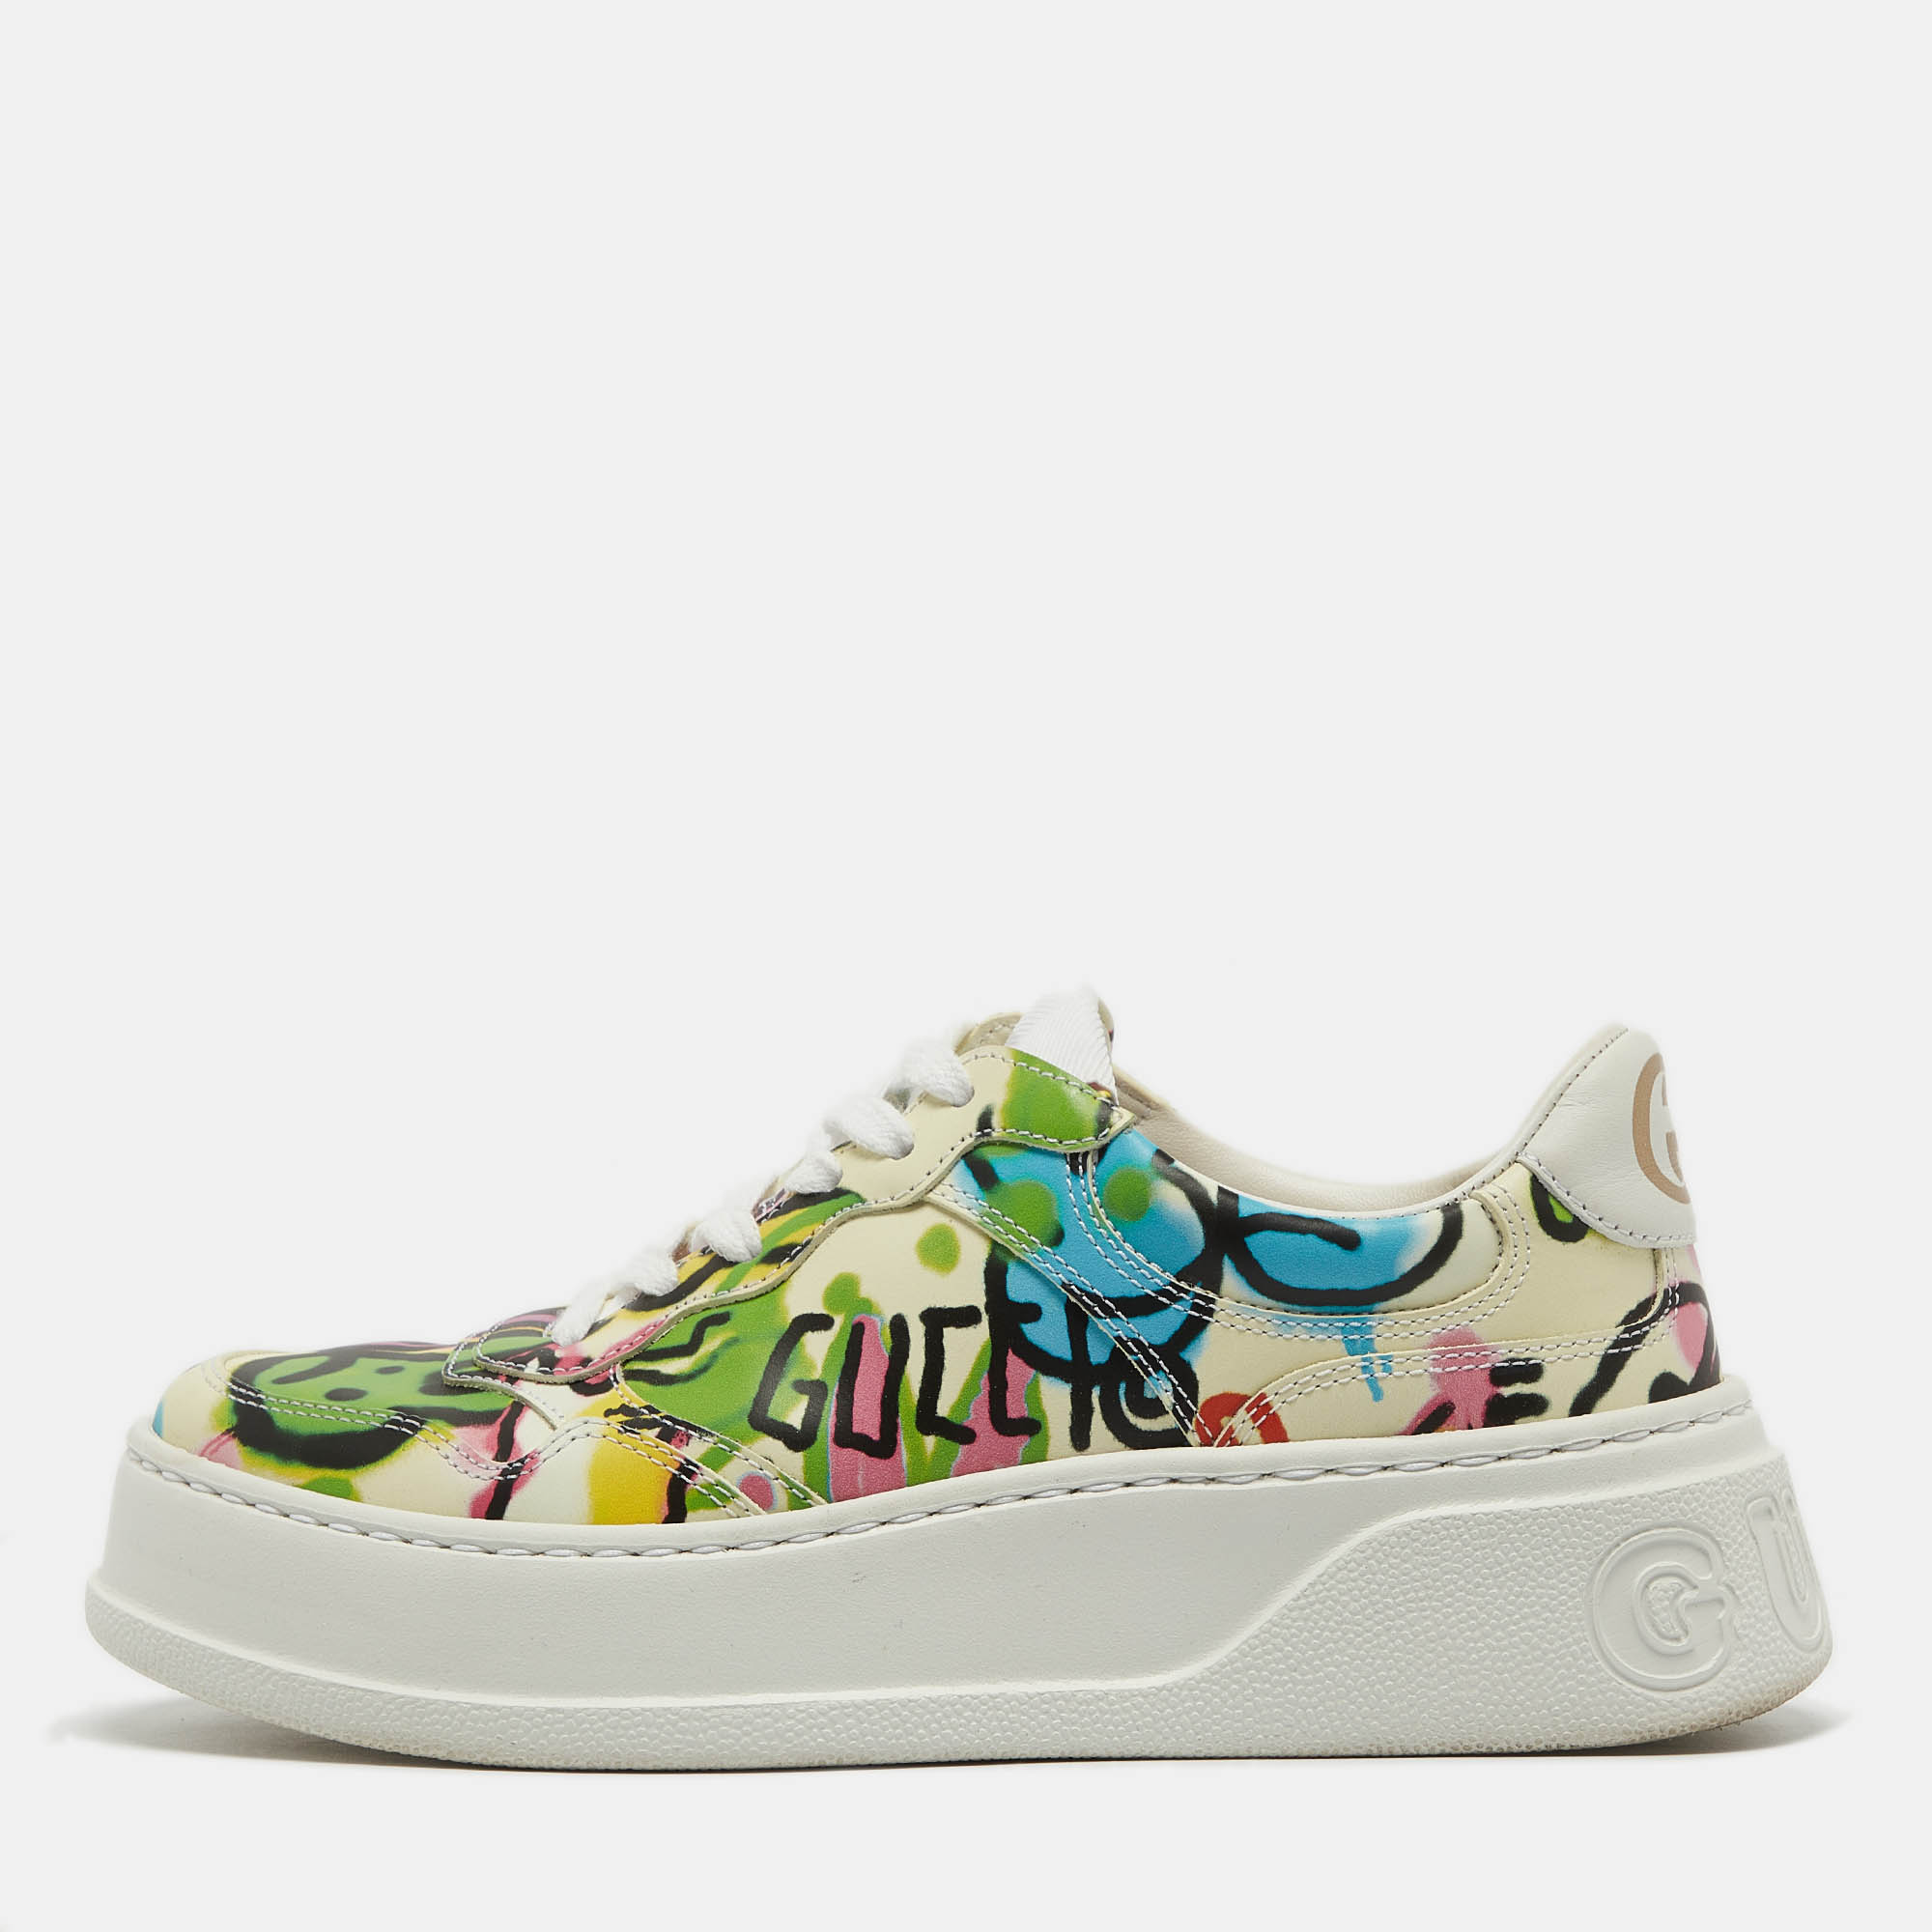 

Gucci Multicolor Printed Leather Platform Sneakers Size